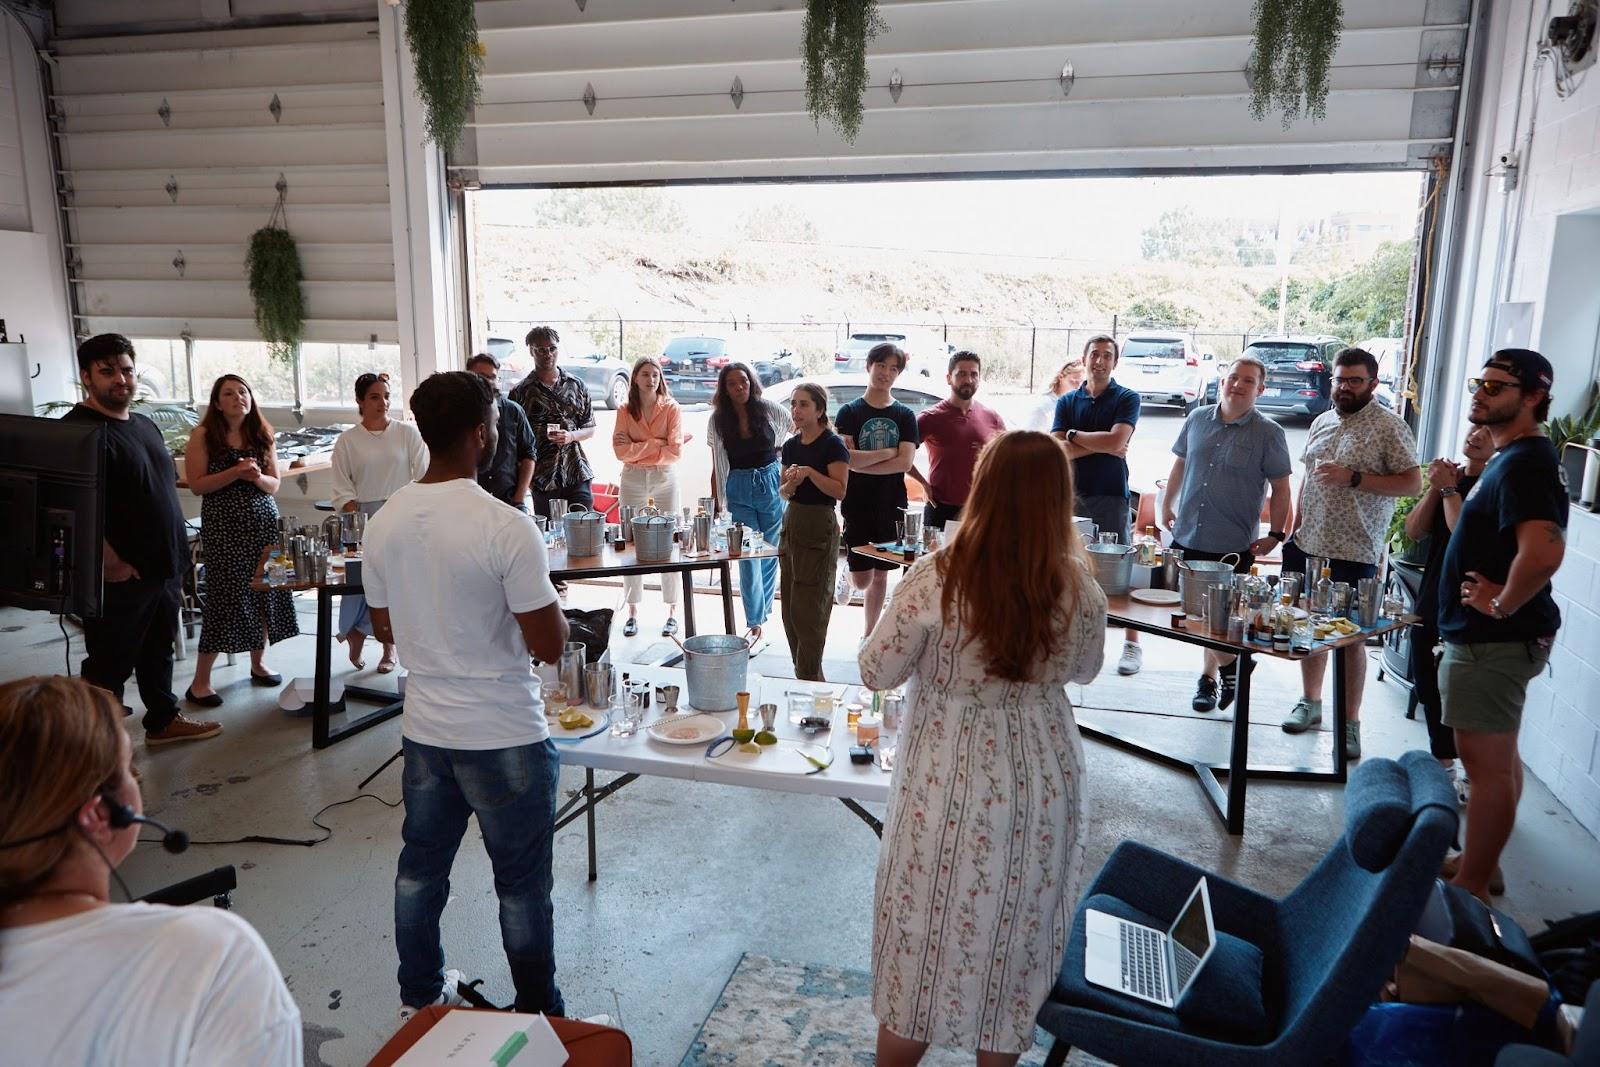 Group of people gathered indoors around tables with cocktail-making supplies, listening to a presentation from two instructors.